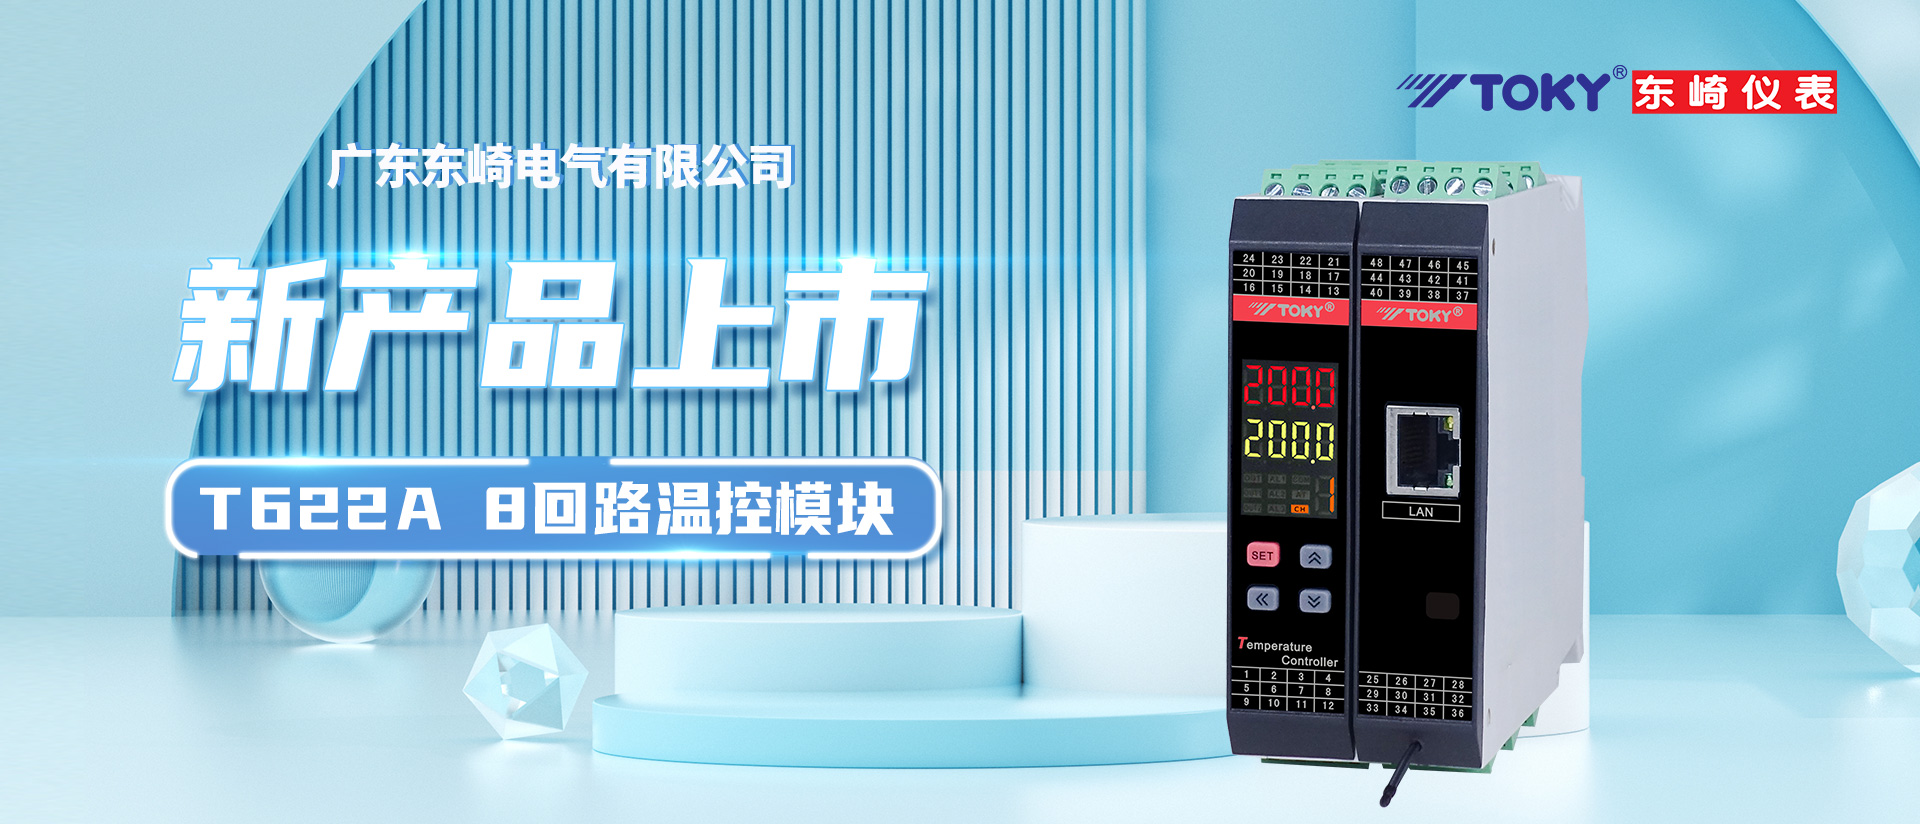 [New product launch] T622A series 8-loop temperature control module